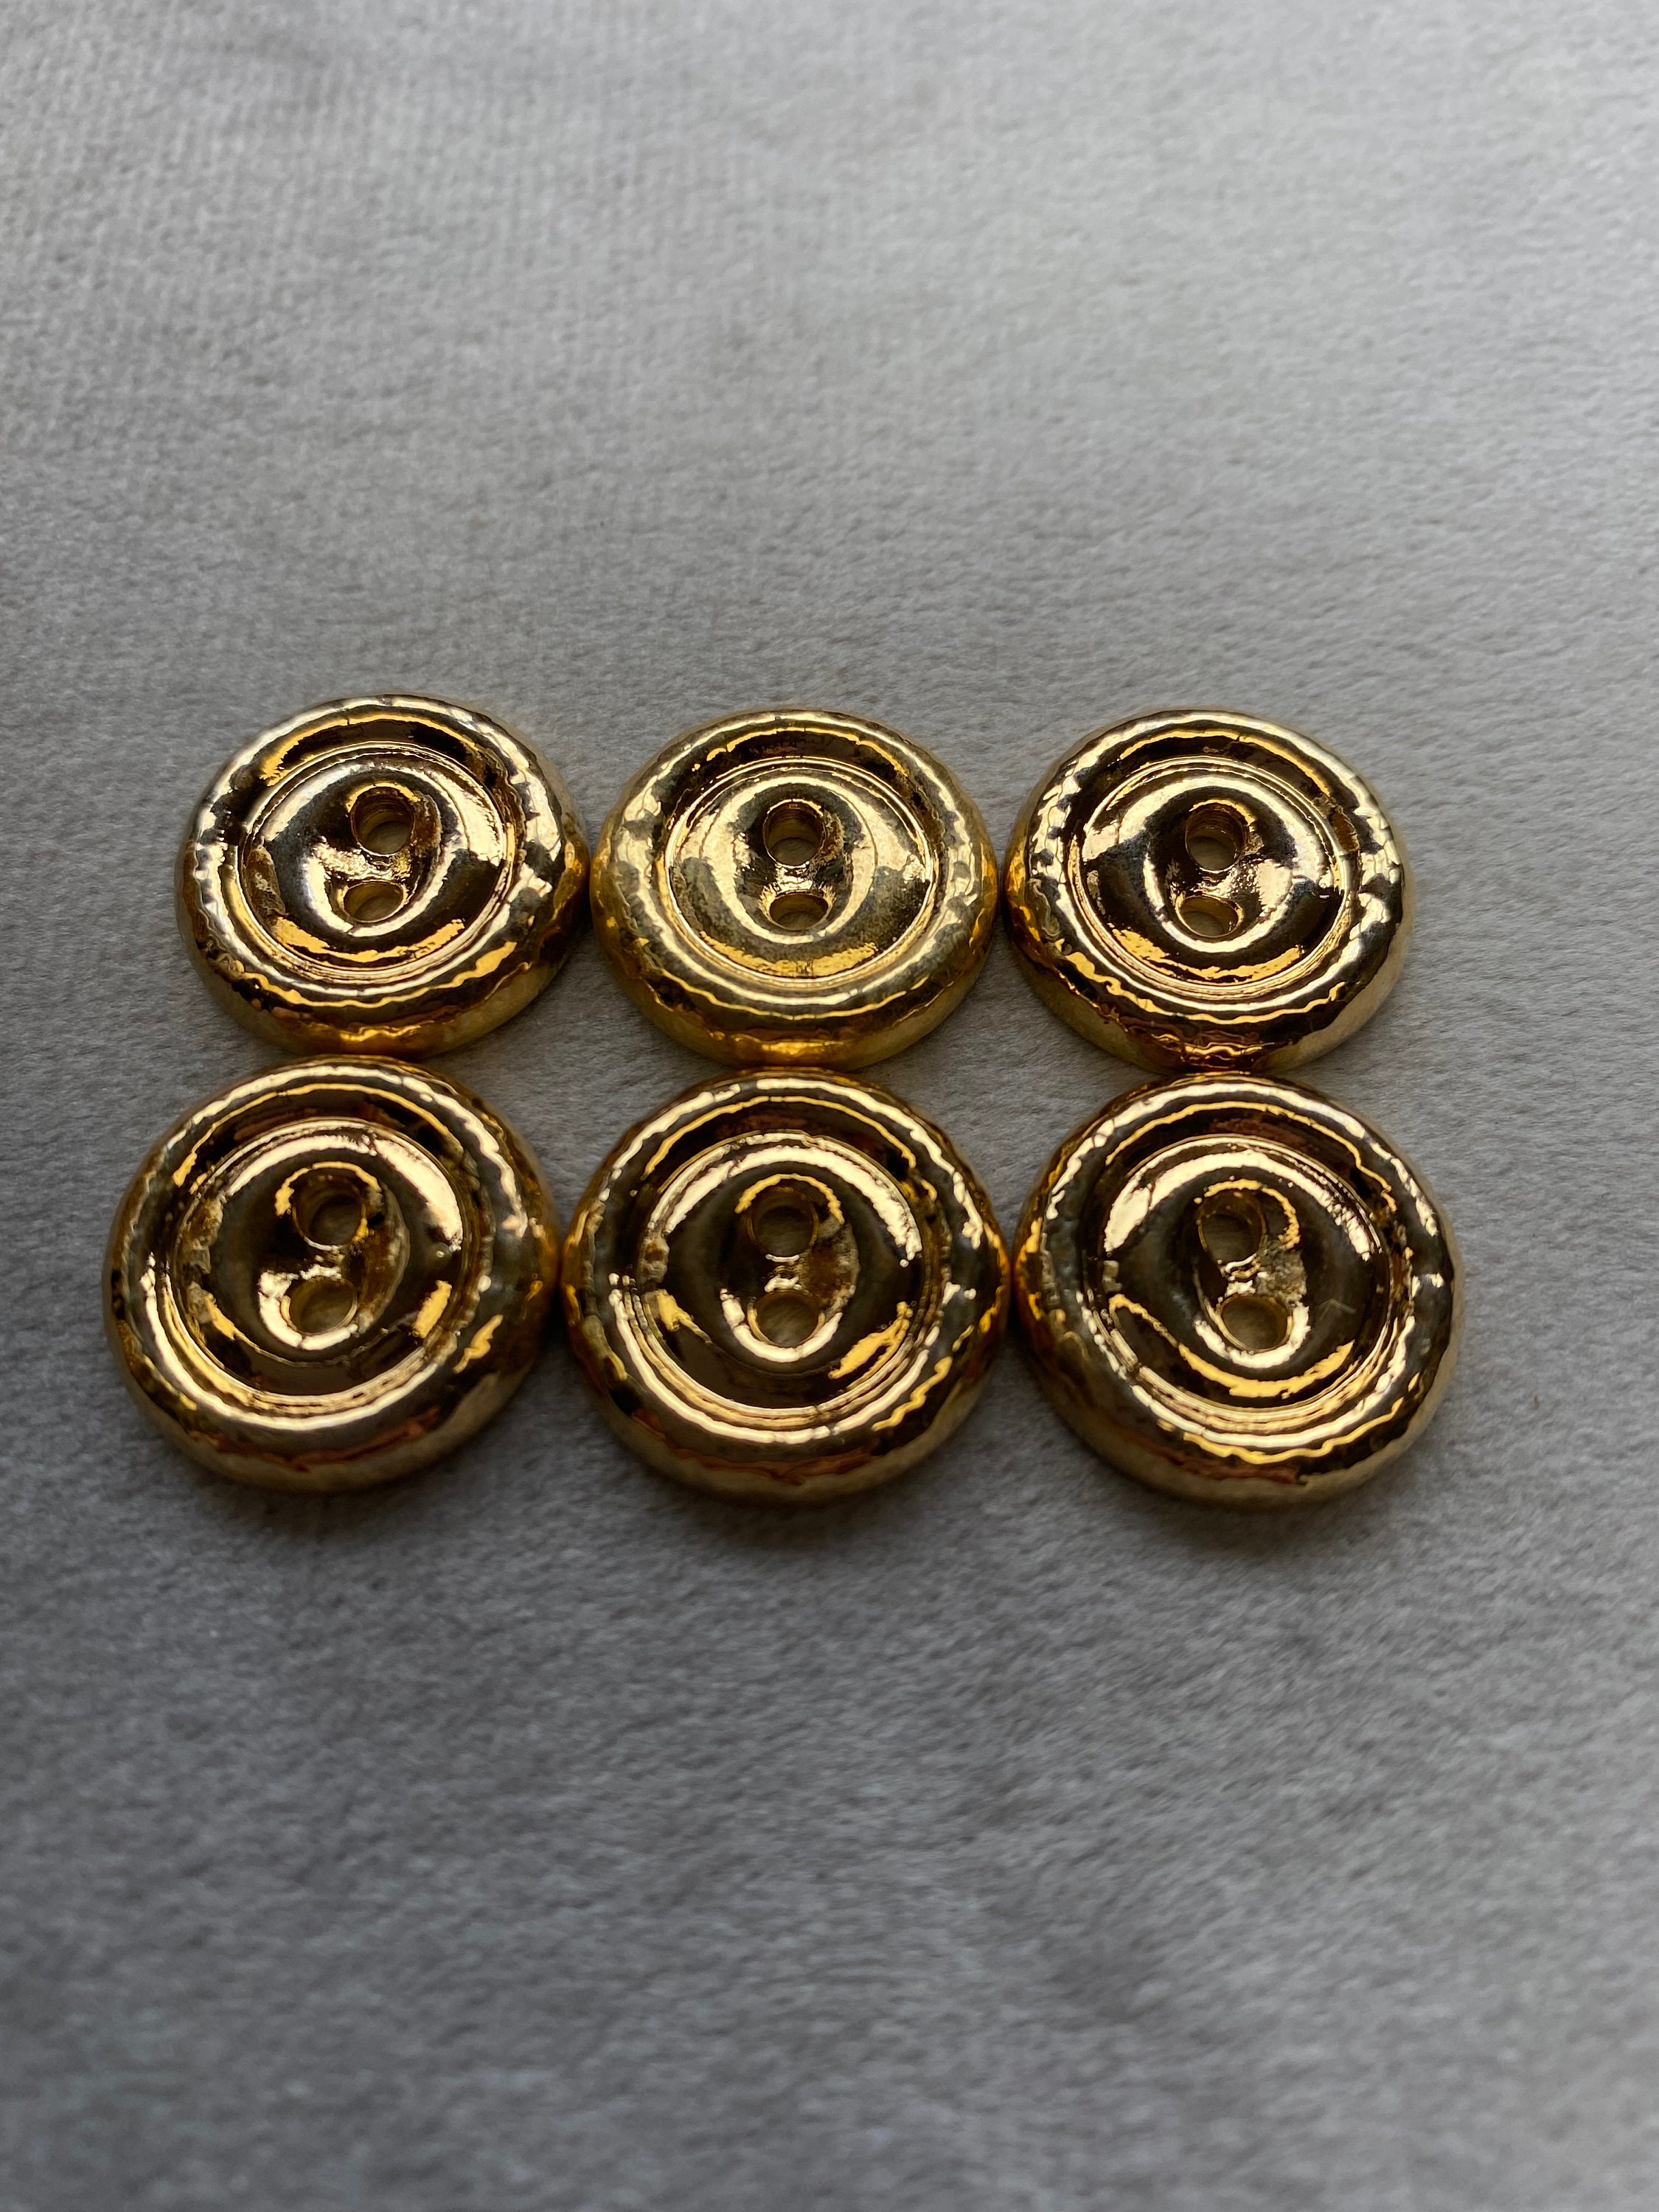 6, Gold Metal Buttons, 4 Sizes Available, Gold Metal Buttons, Metal Jacket  Buttons, Metal Coat Buttons, 4 Hole Buttons 